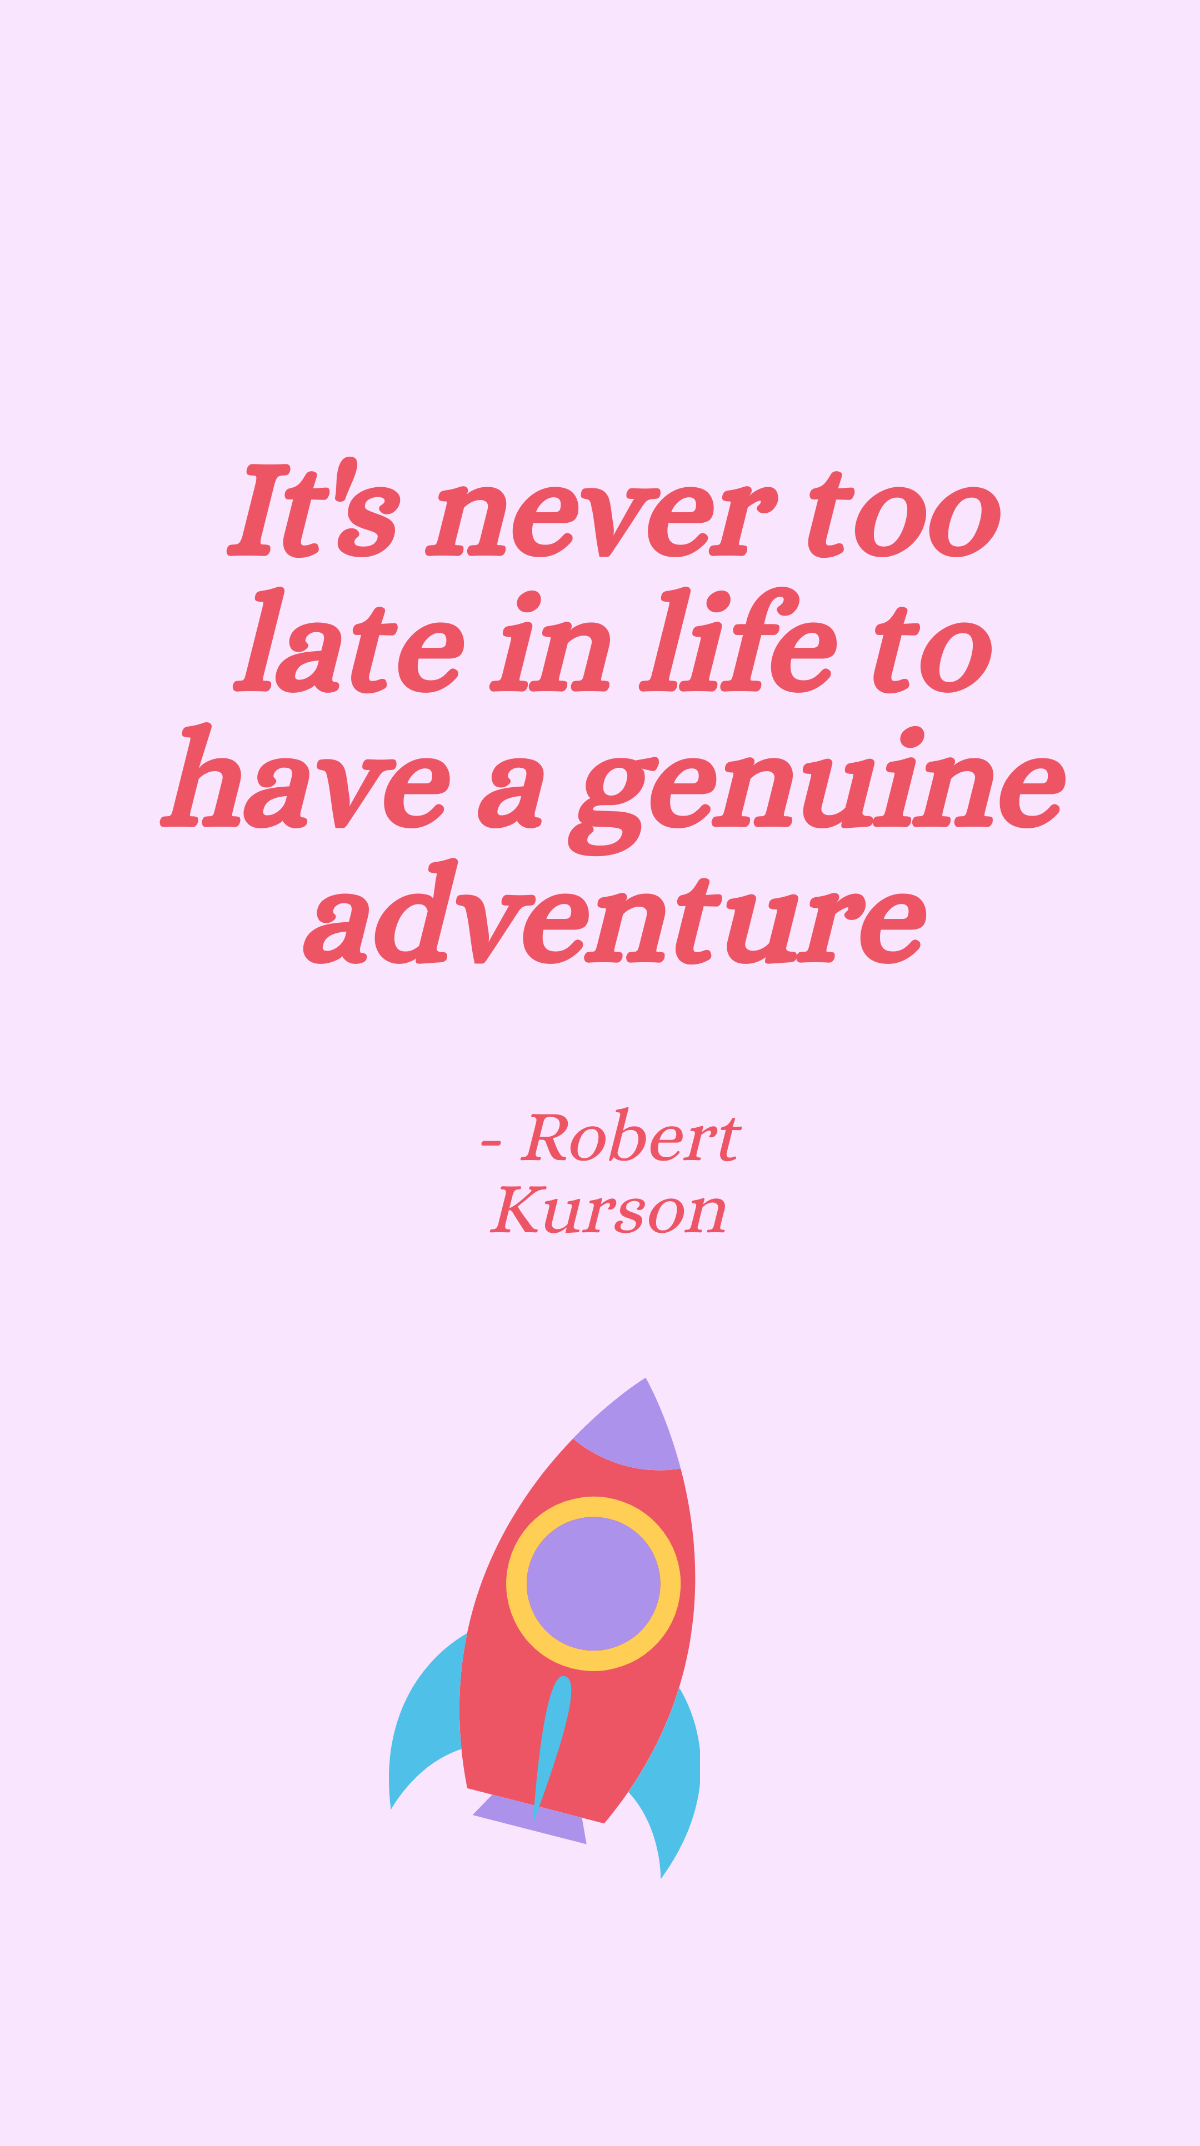 Robert Kurson - It's never too late in life to have a genuine adventure Template